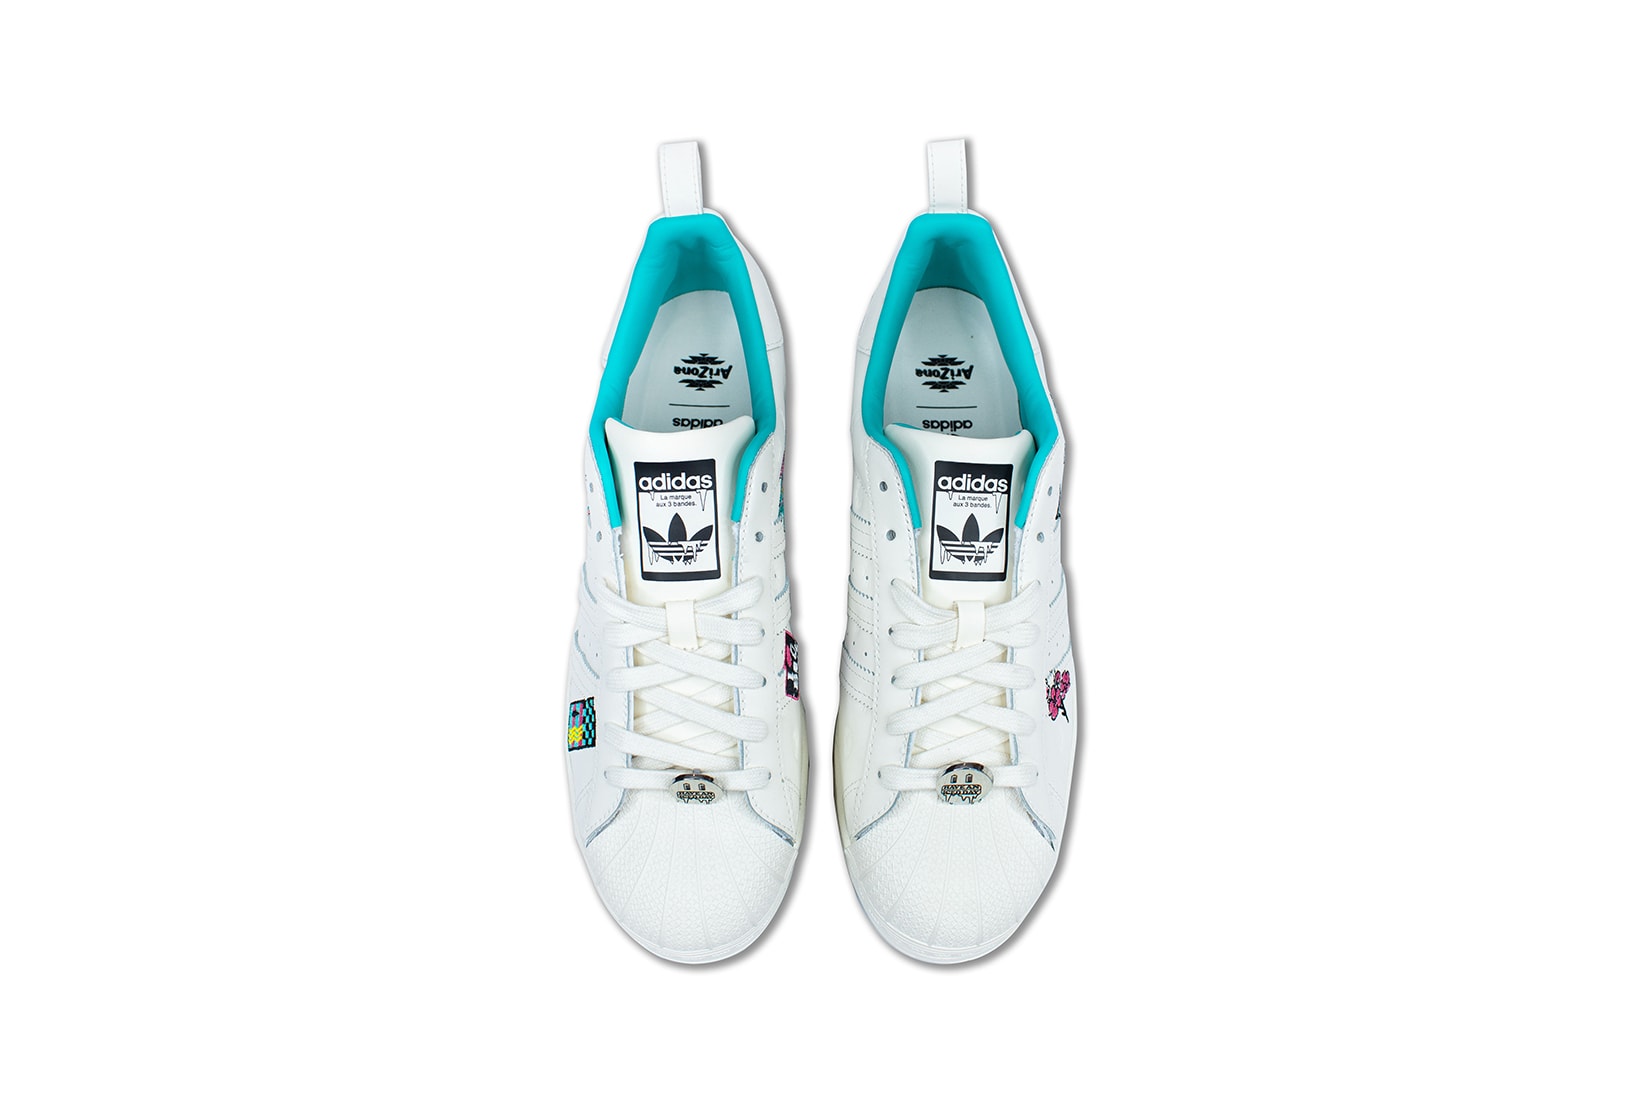 adidas originals arizona iced tea superstar collaboration sneakers big cans aerial birds eye view white laces teal blue insole black